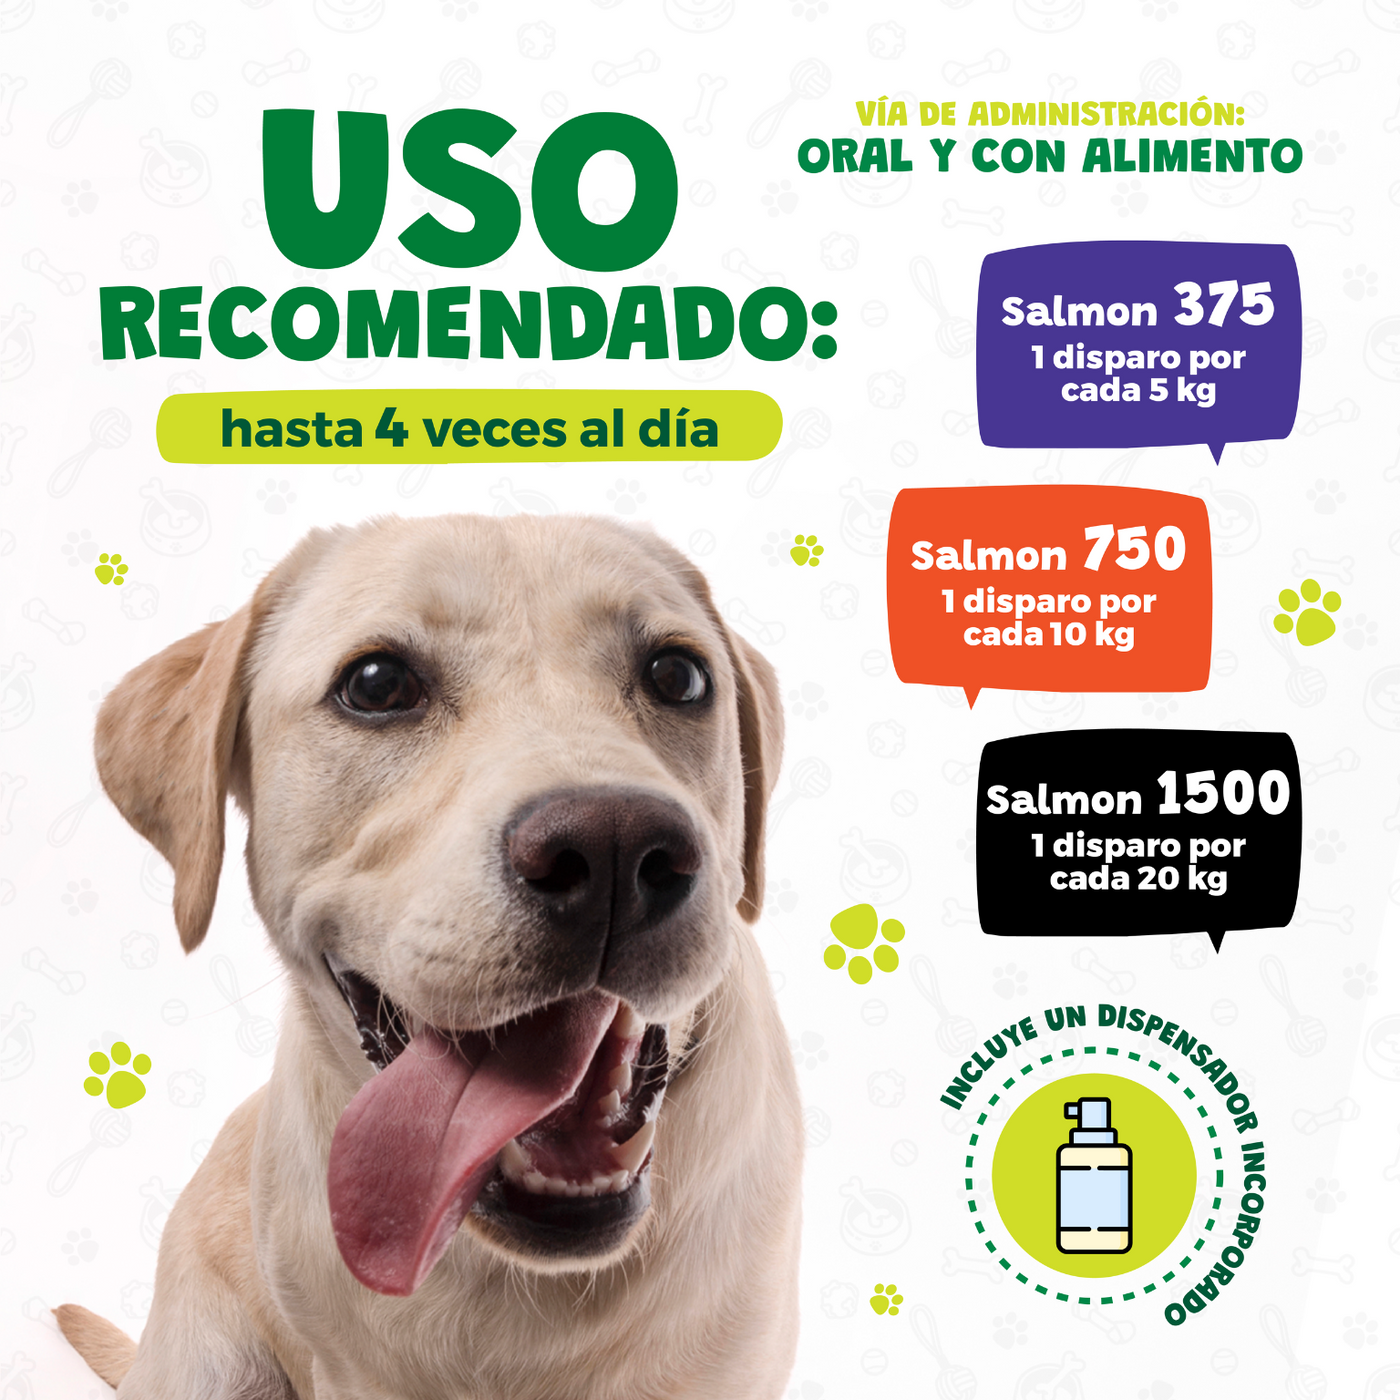 Waggy's® Aceite Perros